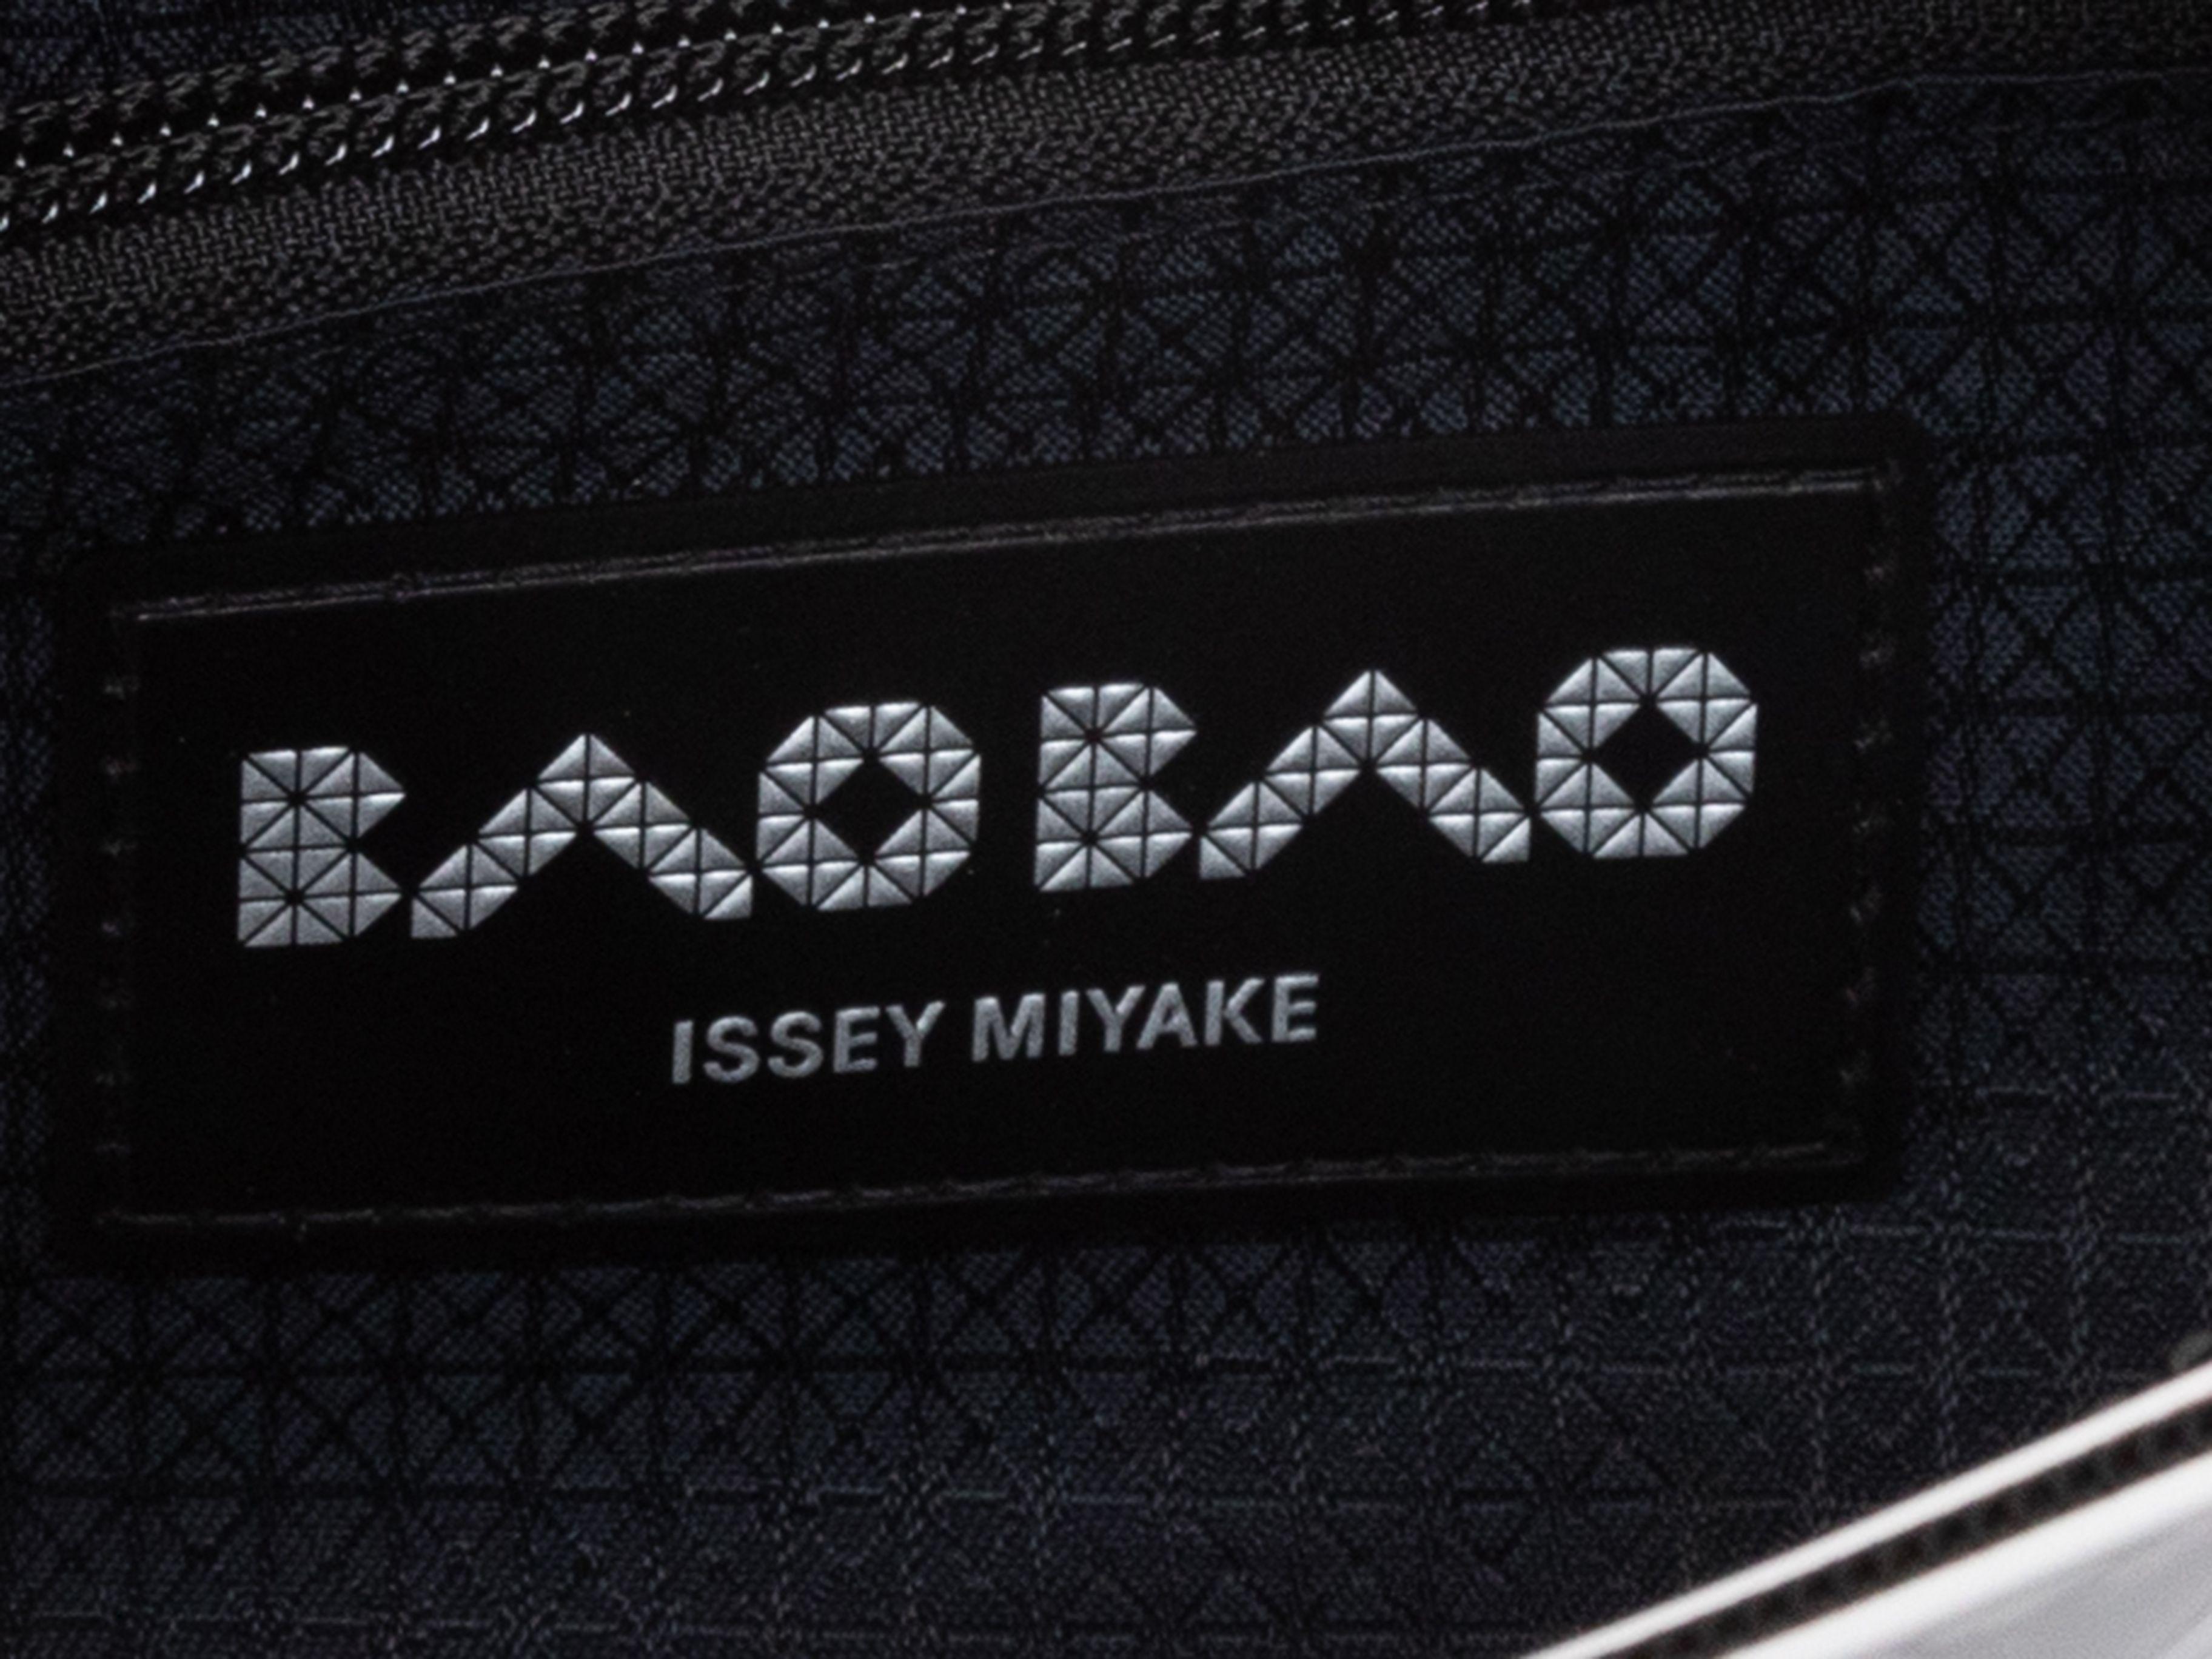 Product Details: White & Black Issey Miyake Bao Bao Crossbody Bag. This Bao Bao bag features a mesh and polyvinyl body, silver-tone hardware, a single flat crossbody strap, and a top zip closure. 9.5